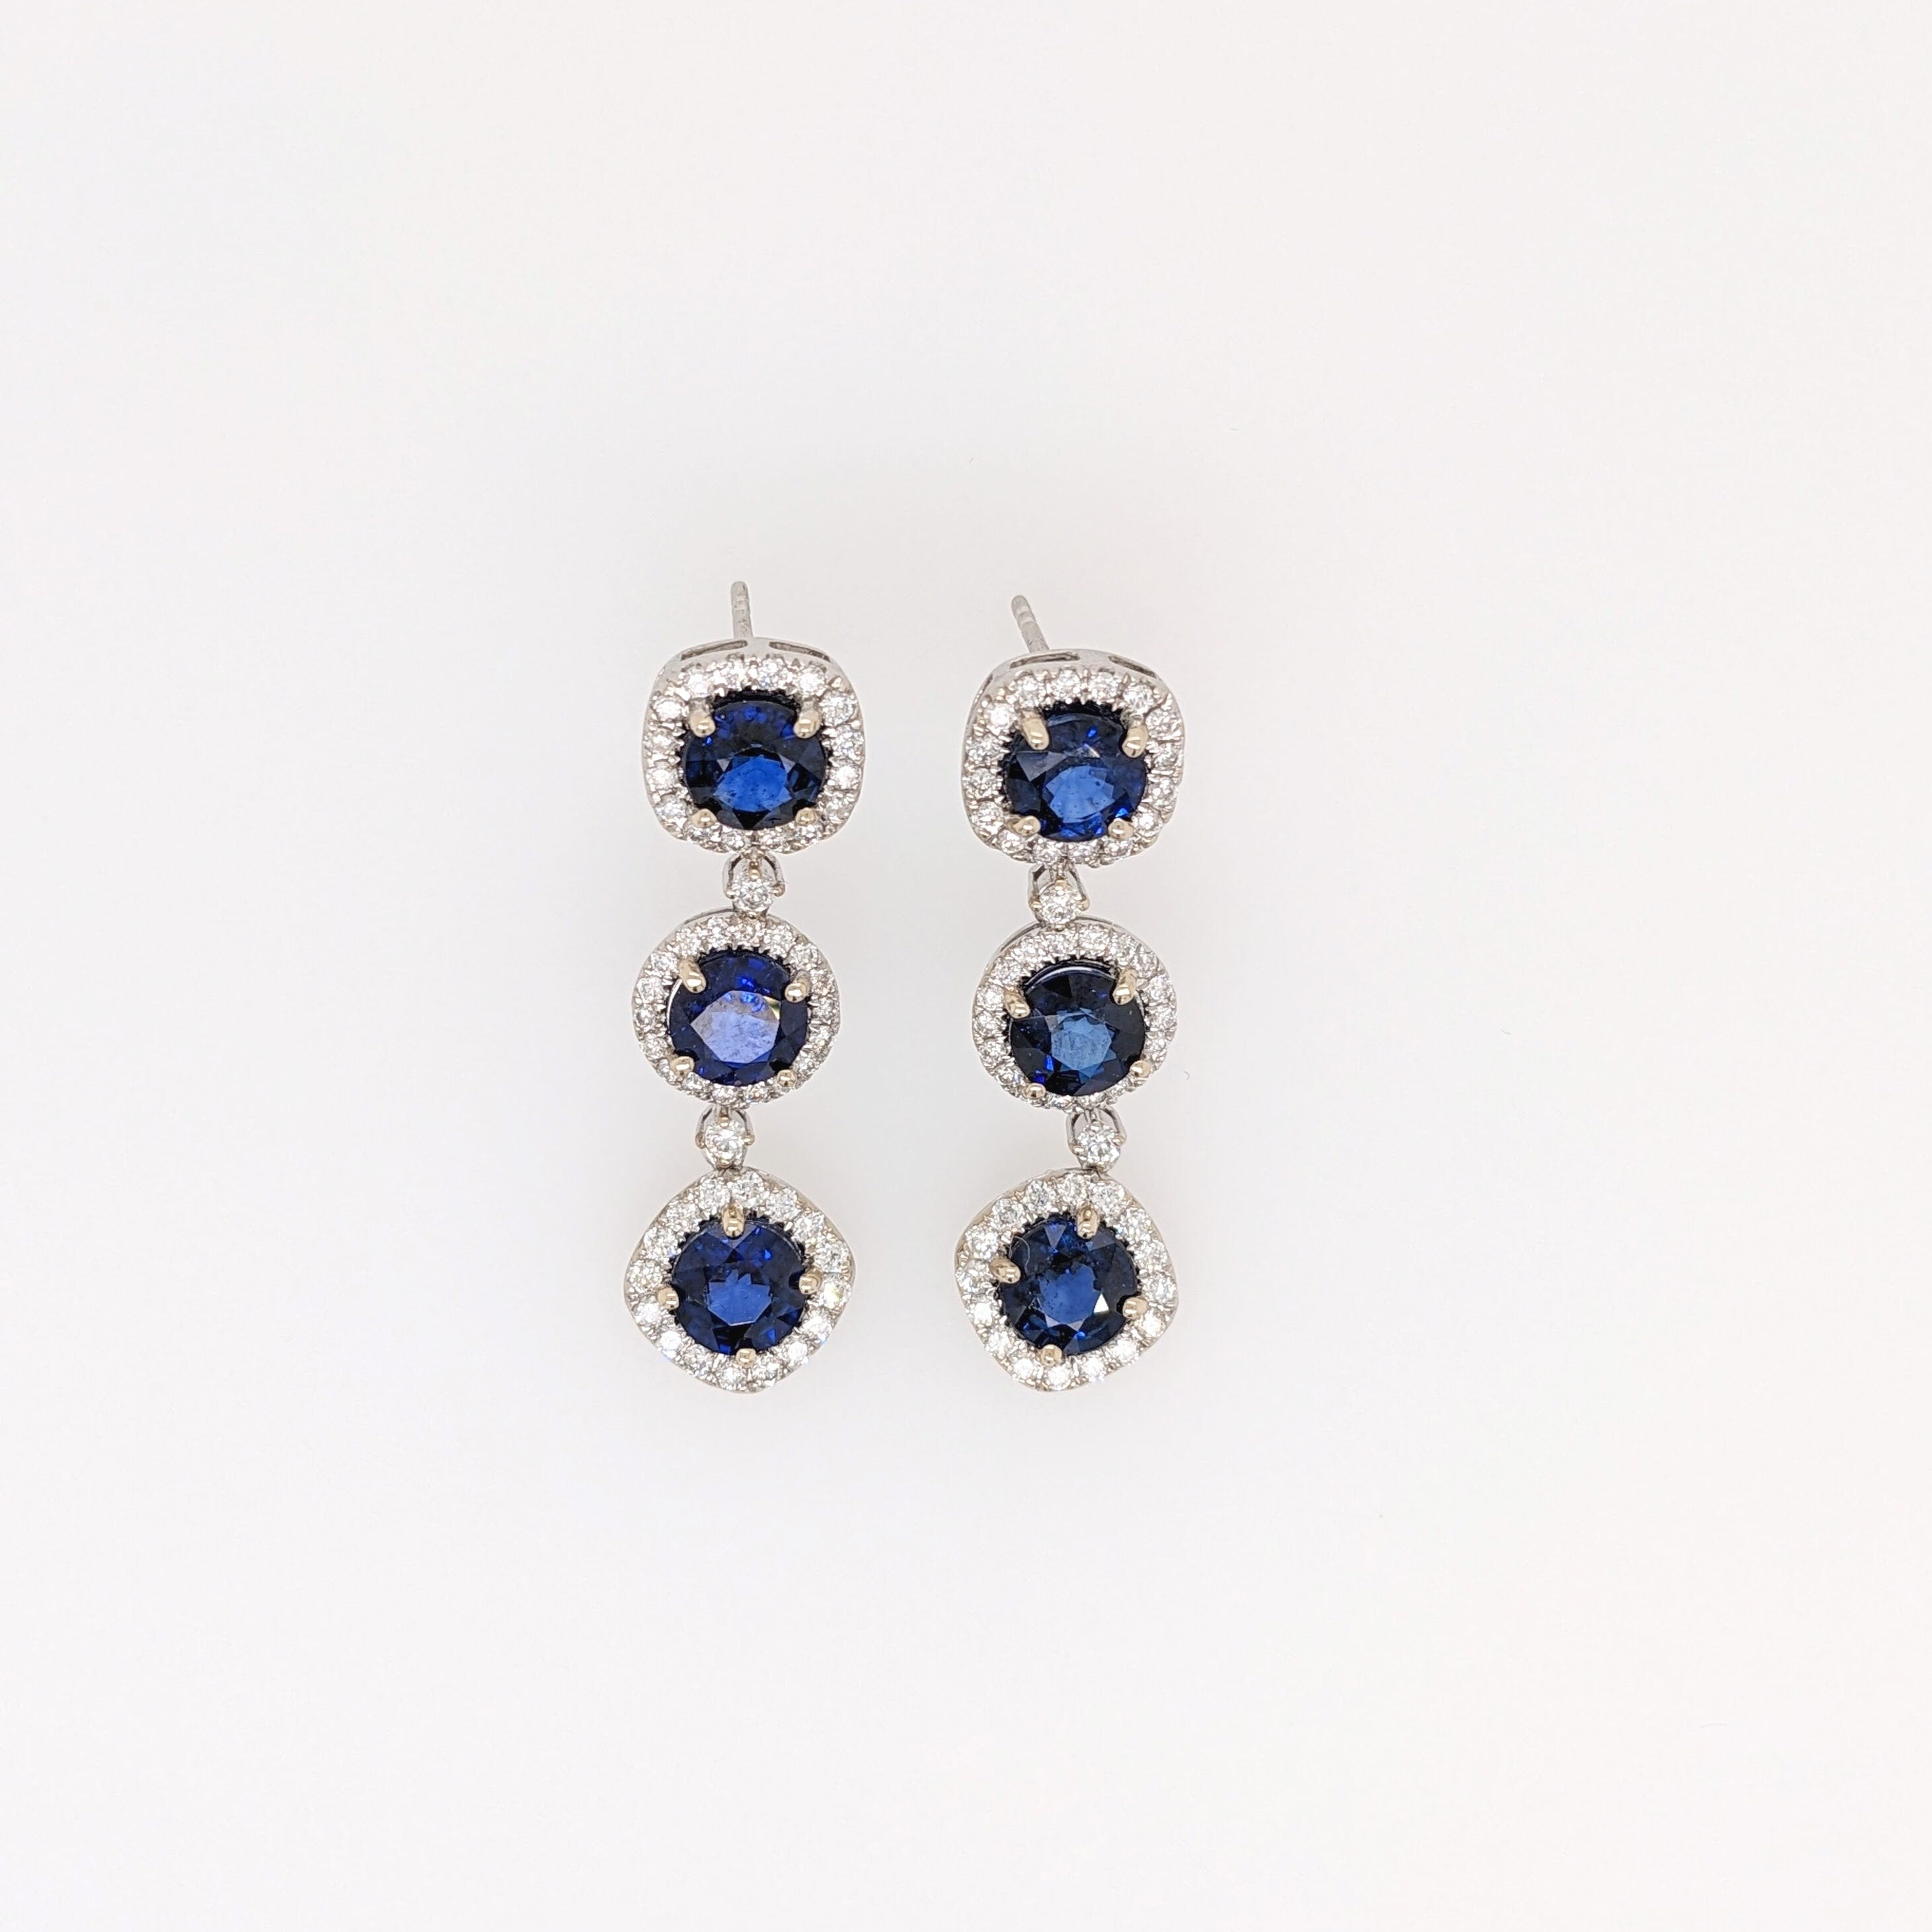 Dangly Blue Sapphire Earrings in 14K Gold w Natural Diamond Accents | Drop Earrings | Round 6mm | Blue Gems | September Birthstone